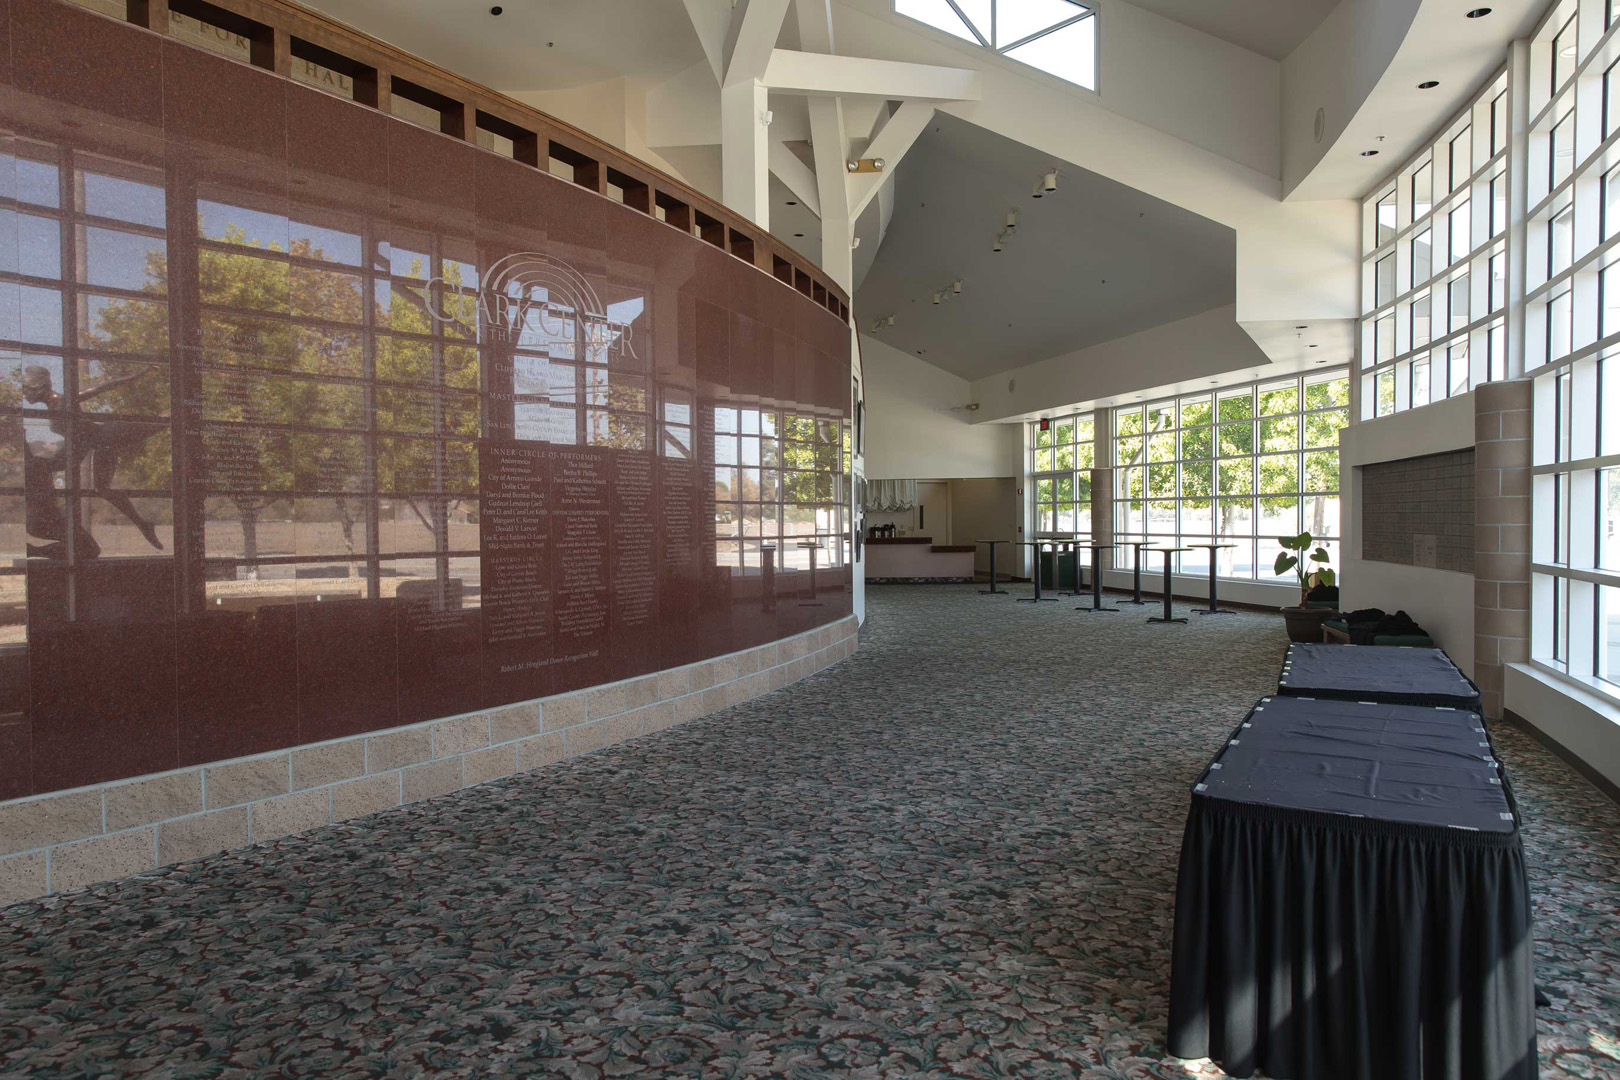 Lobby Looking Towards Concession Area